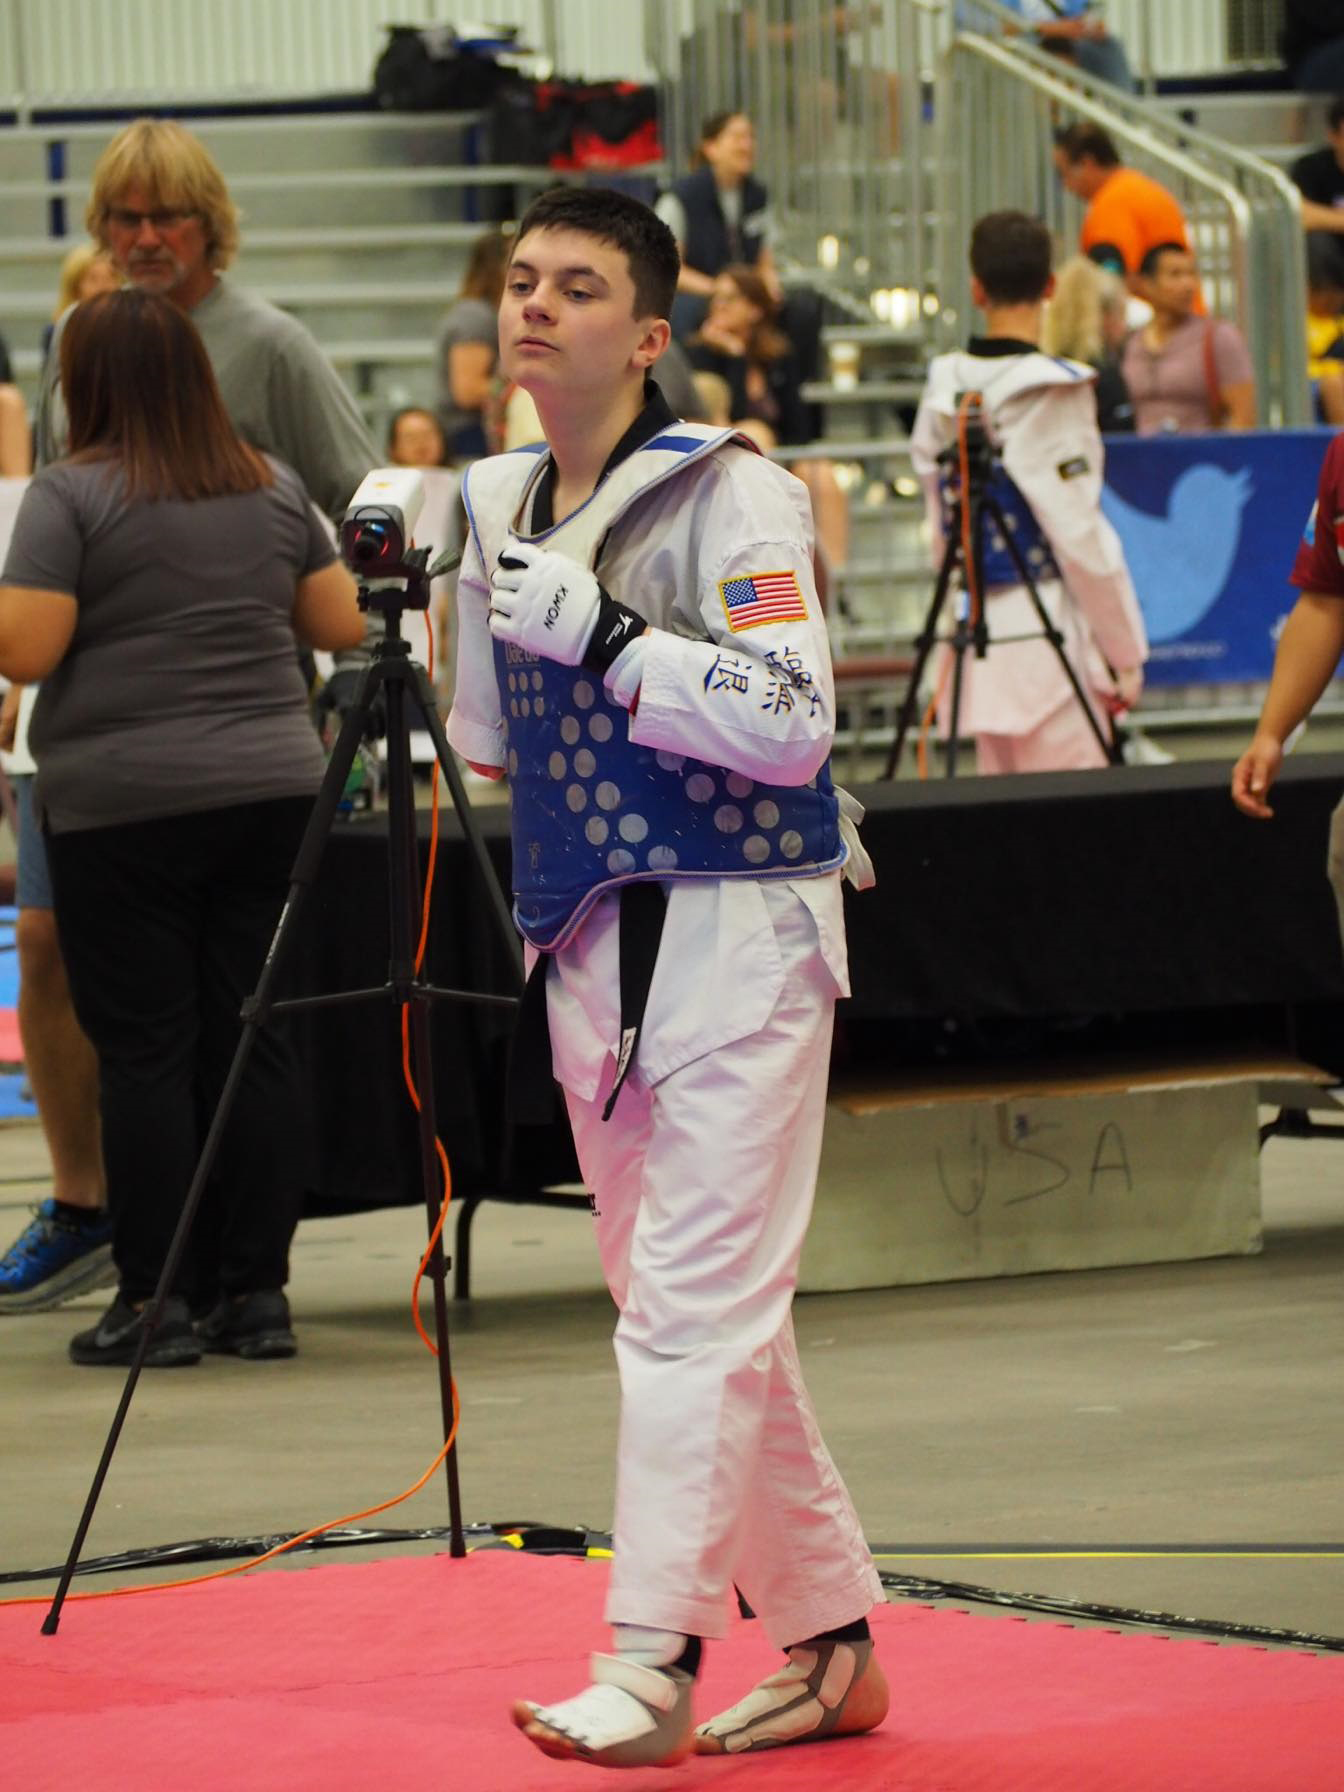 PHOTO: Austin Osner, 14, of Fairfield, Ohio, competes in taekwondo tournaments across the U.S. and wants to qualify for the 2024 Paralympics in Paris.